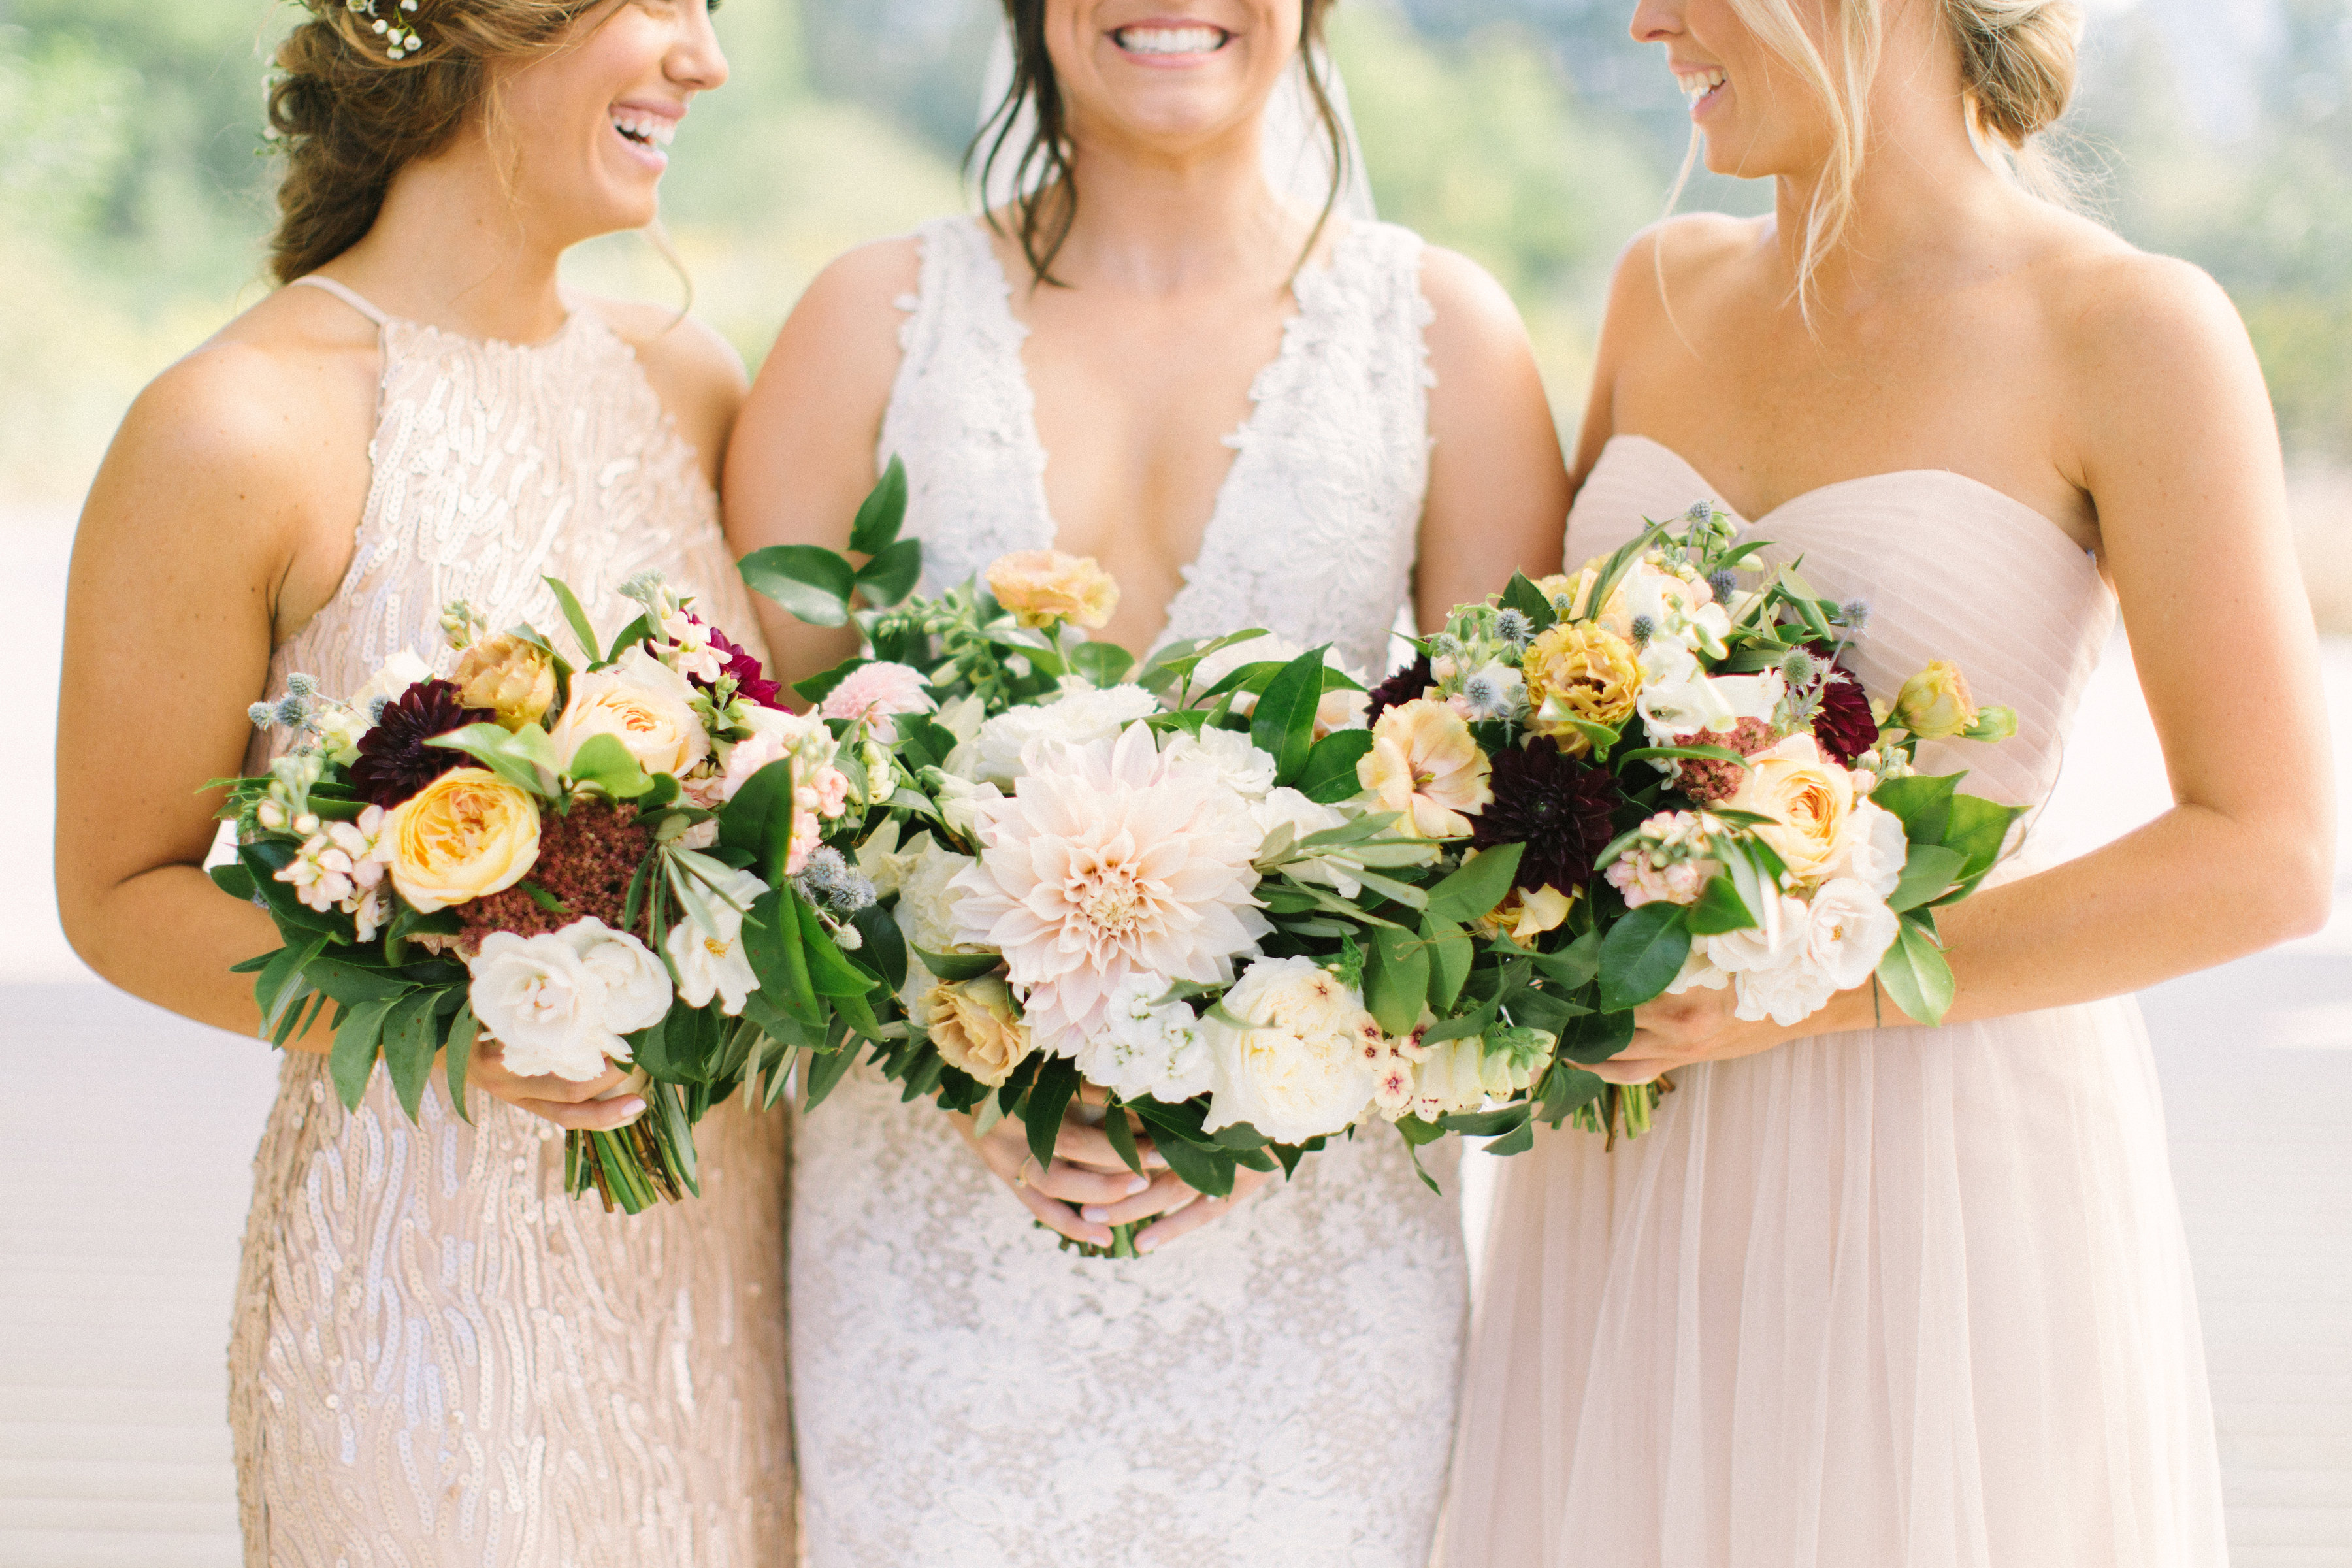 Early autumn wedding, bride and bridal party with neutral bouquets of burgundy dahlias and roses.